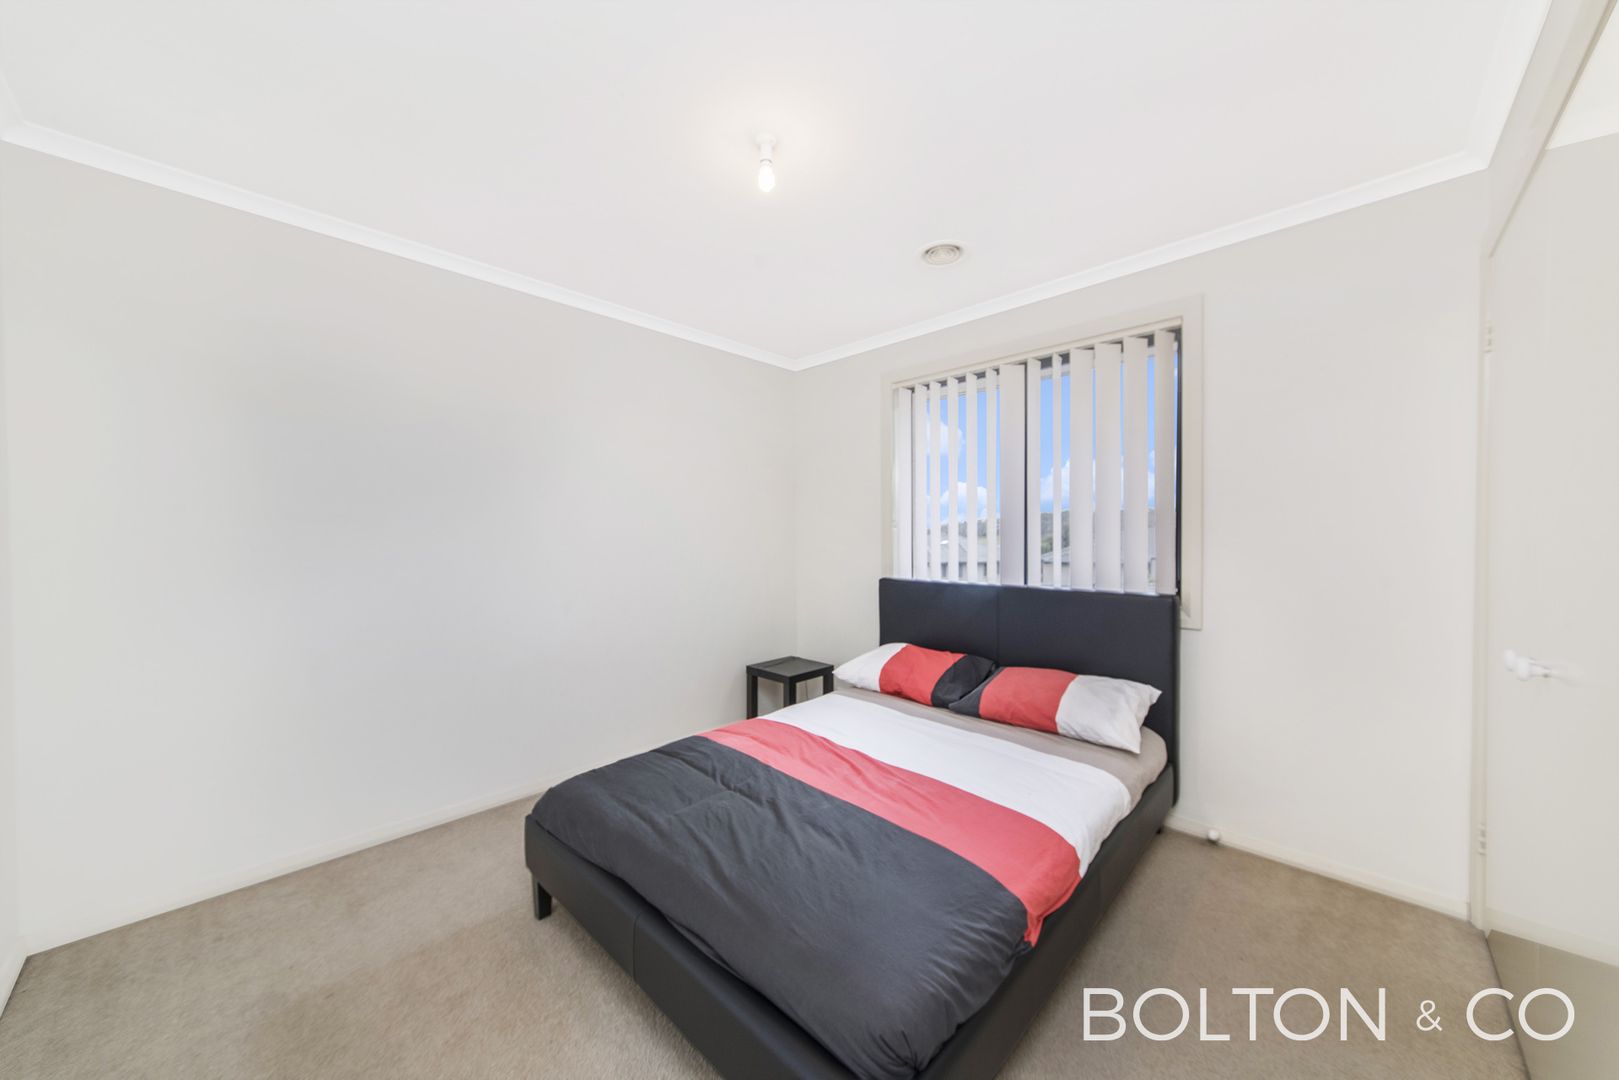 65 Mary Gillespie Ave, Gungahlin ACT 2912, Image 1